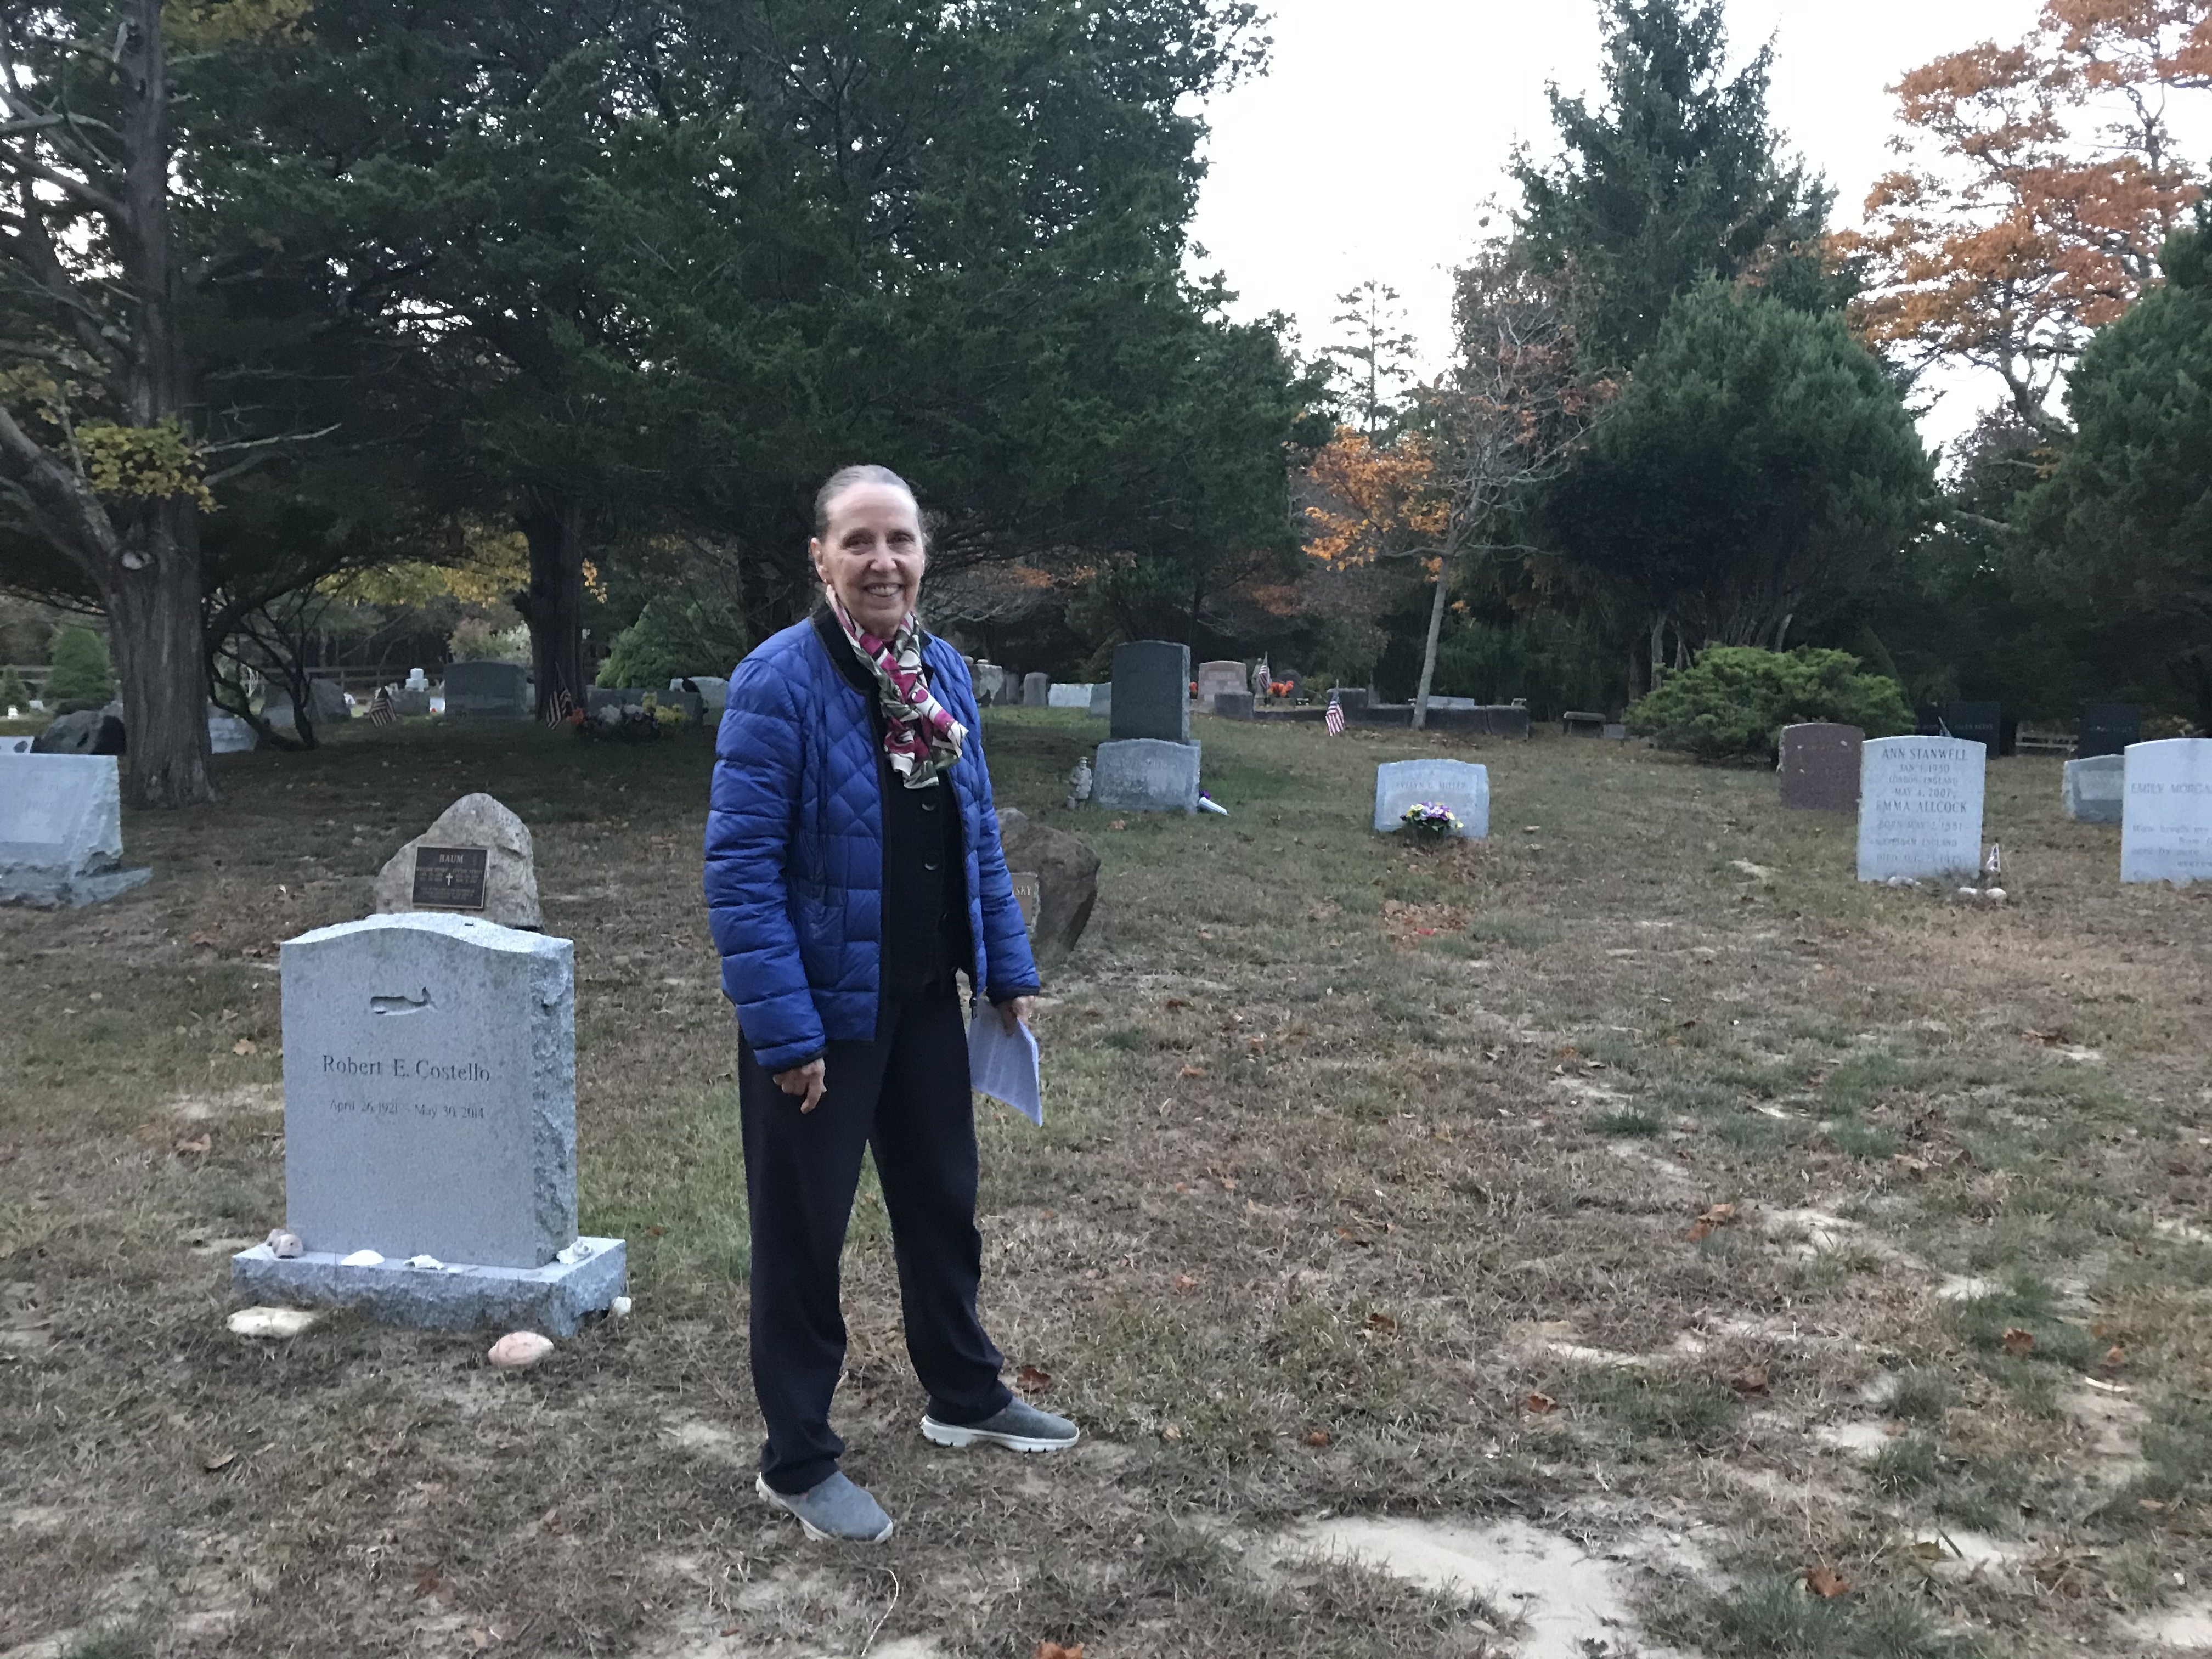 Helen Harrson, director of the Pollock-Krasner House and Study Center, will give a tour of the Green River cemetery and the artists, writers, and actors buried there on Friday.  ELIZABETH VESPE